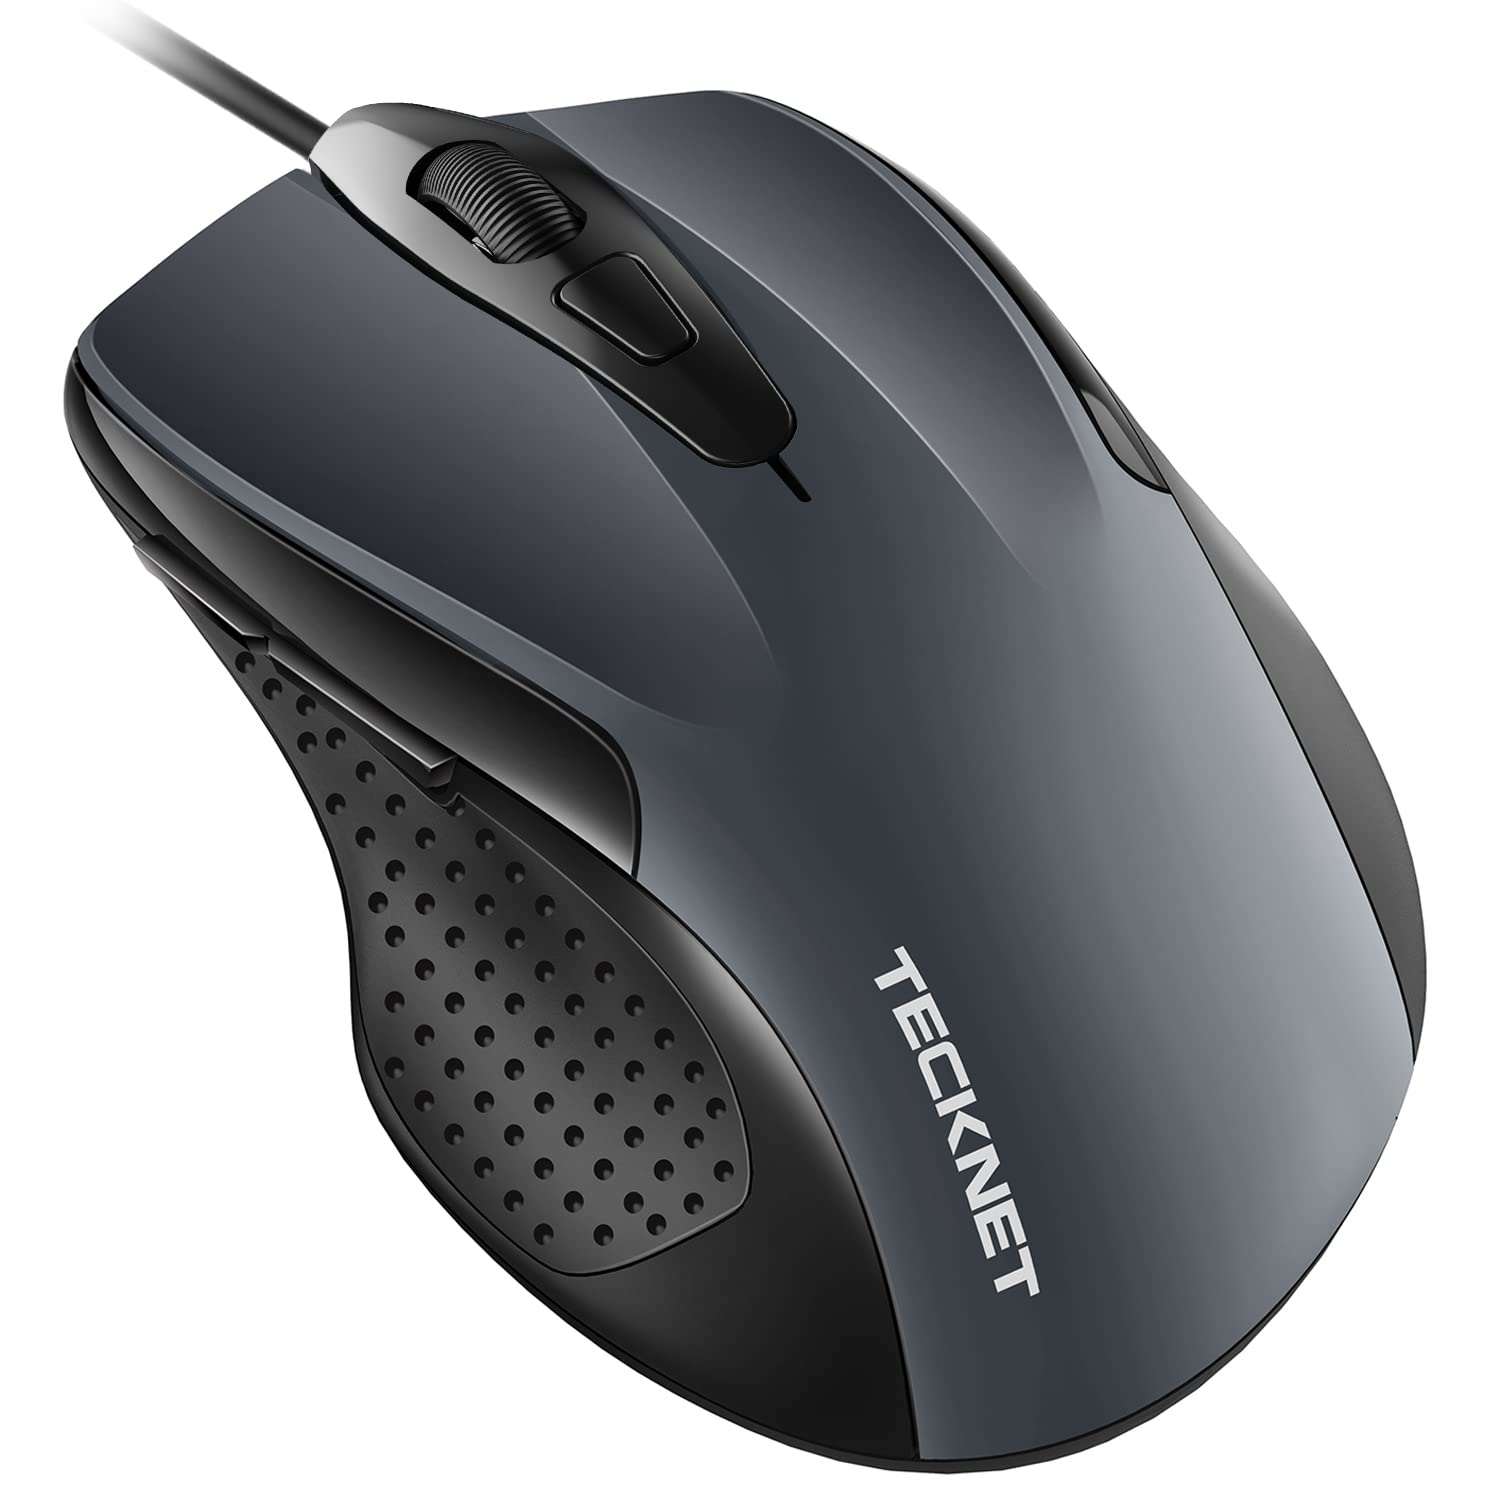 TECKNET Pro S2 High Performance Wired USB Mouse, Computer Mouse for Laptop, PC Mouse, Plug In, 6 Buttons, Upto 2000 DPI